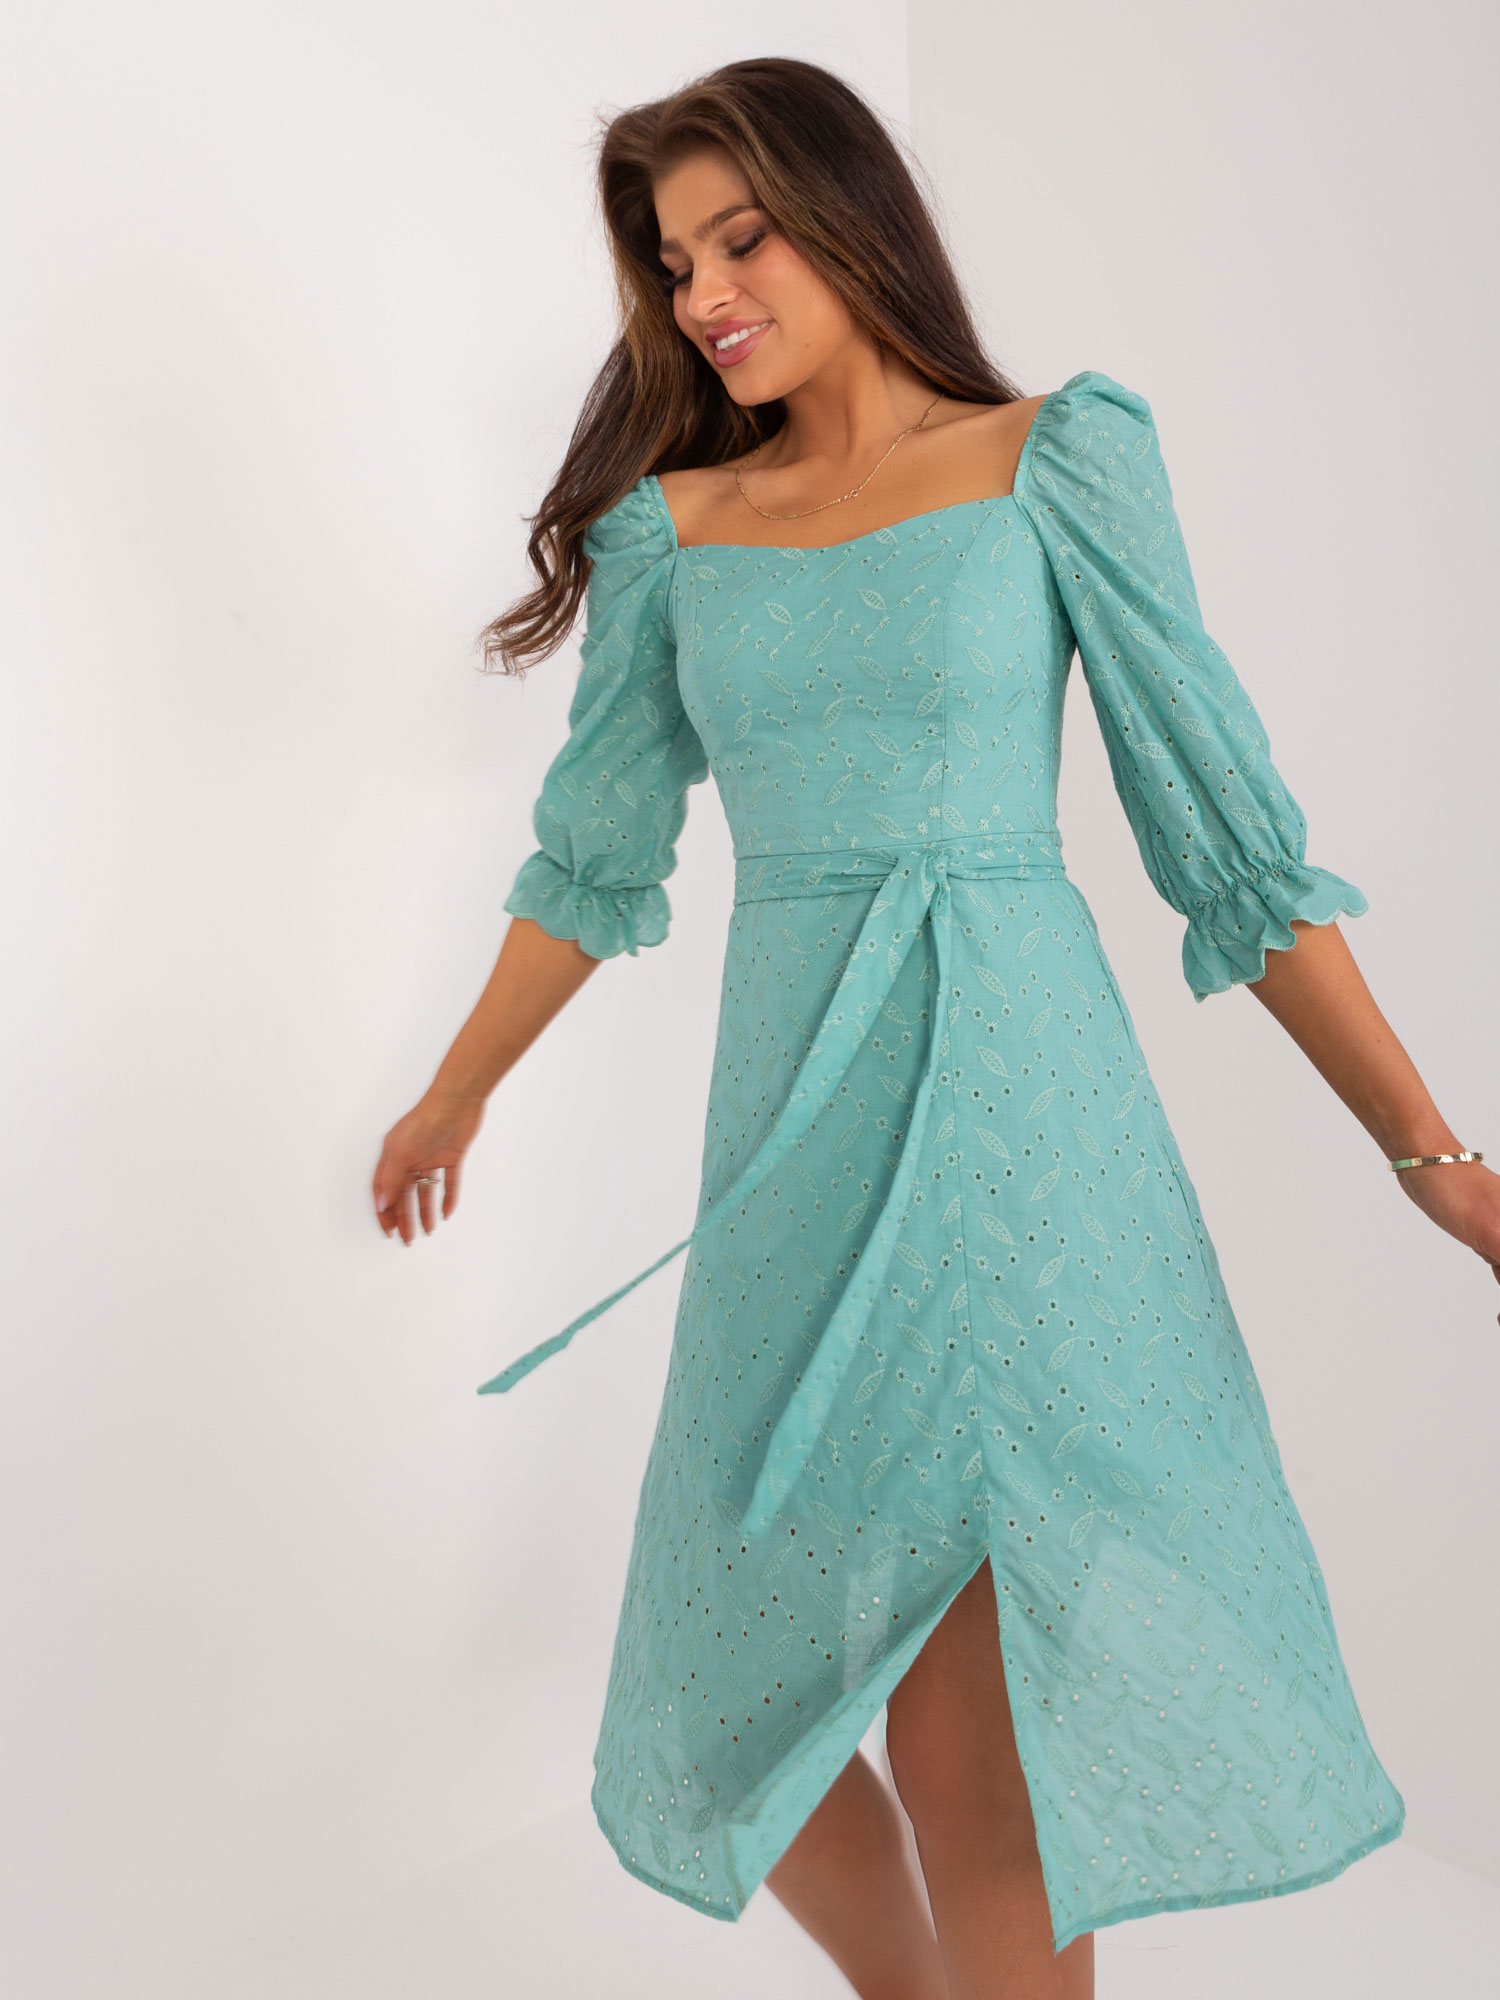 Mint midi dress with puffy sleeves